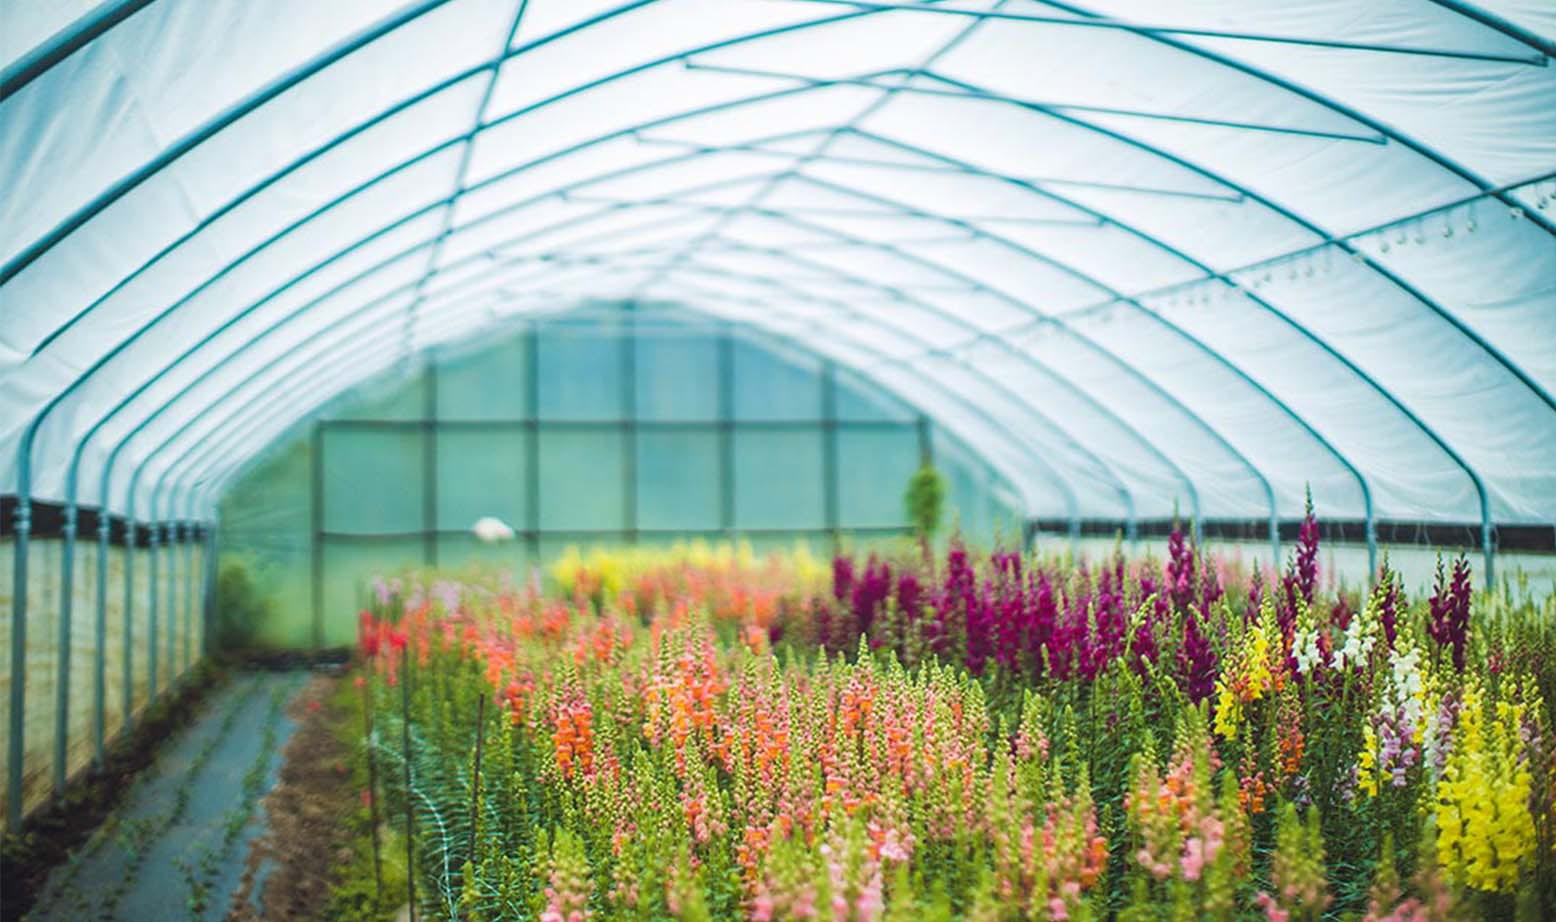 Greenhouse full of vibrant florals